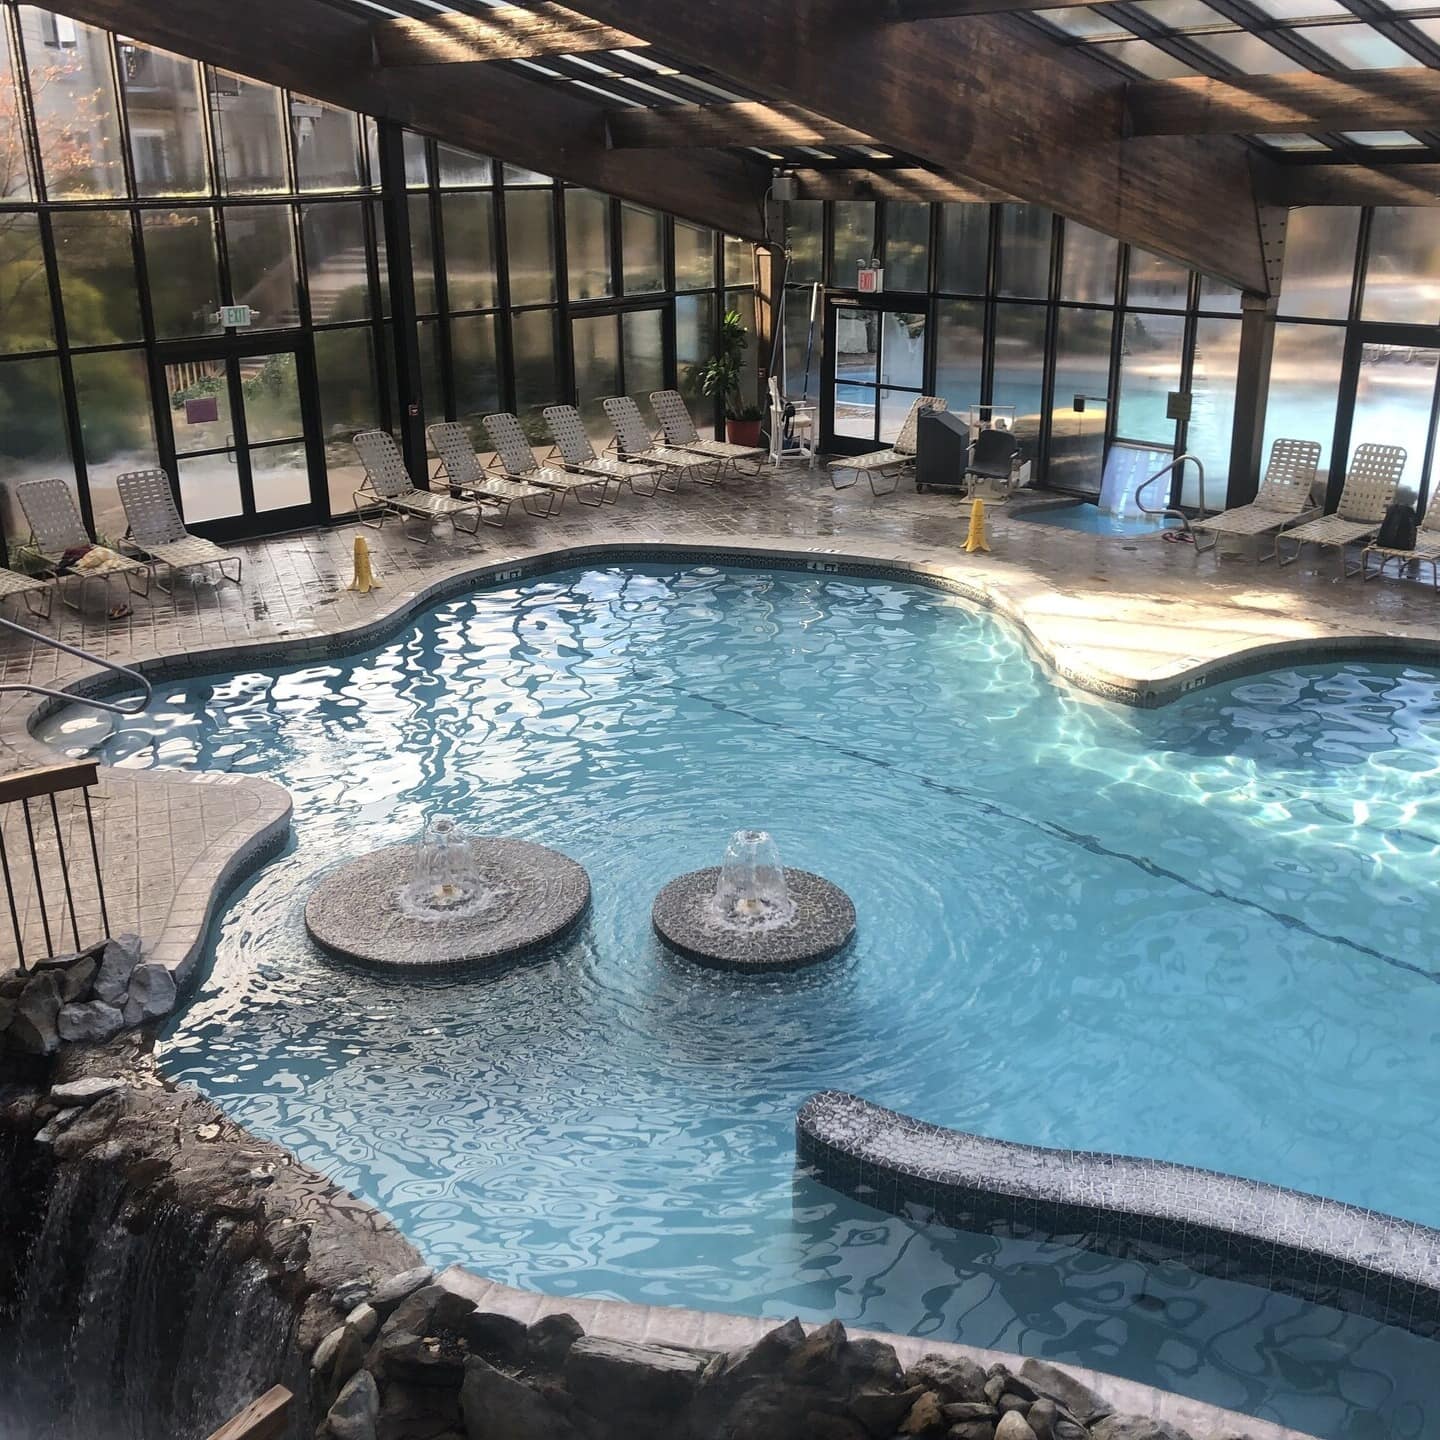 View of indoor and outdoor pool area of Minerals Resort and Spa in Vernon, New Jersey